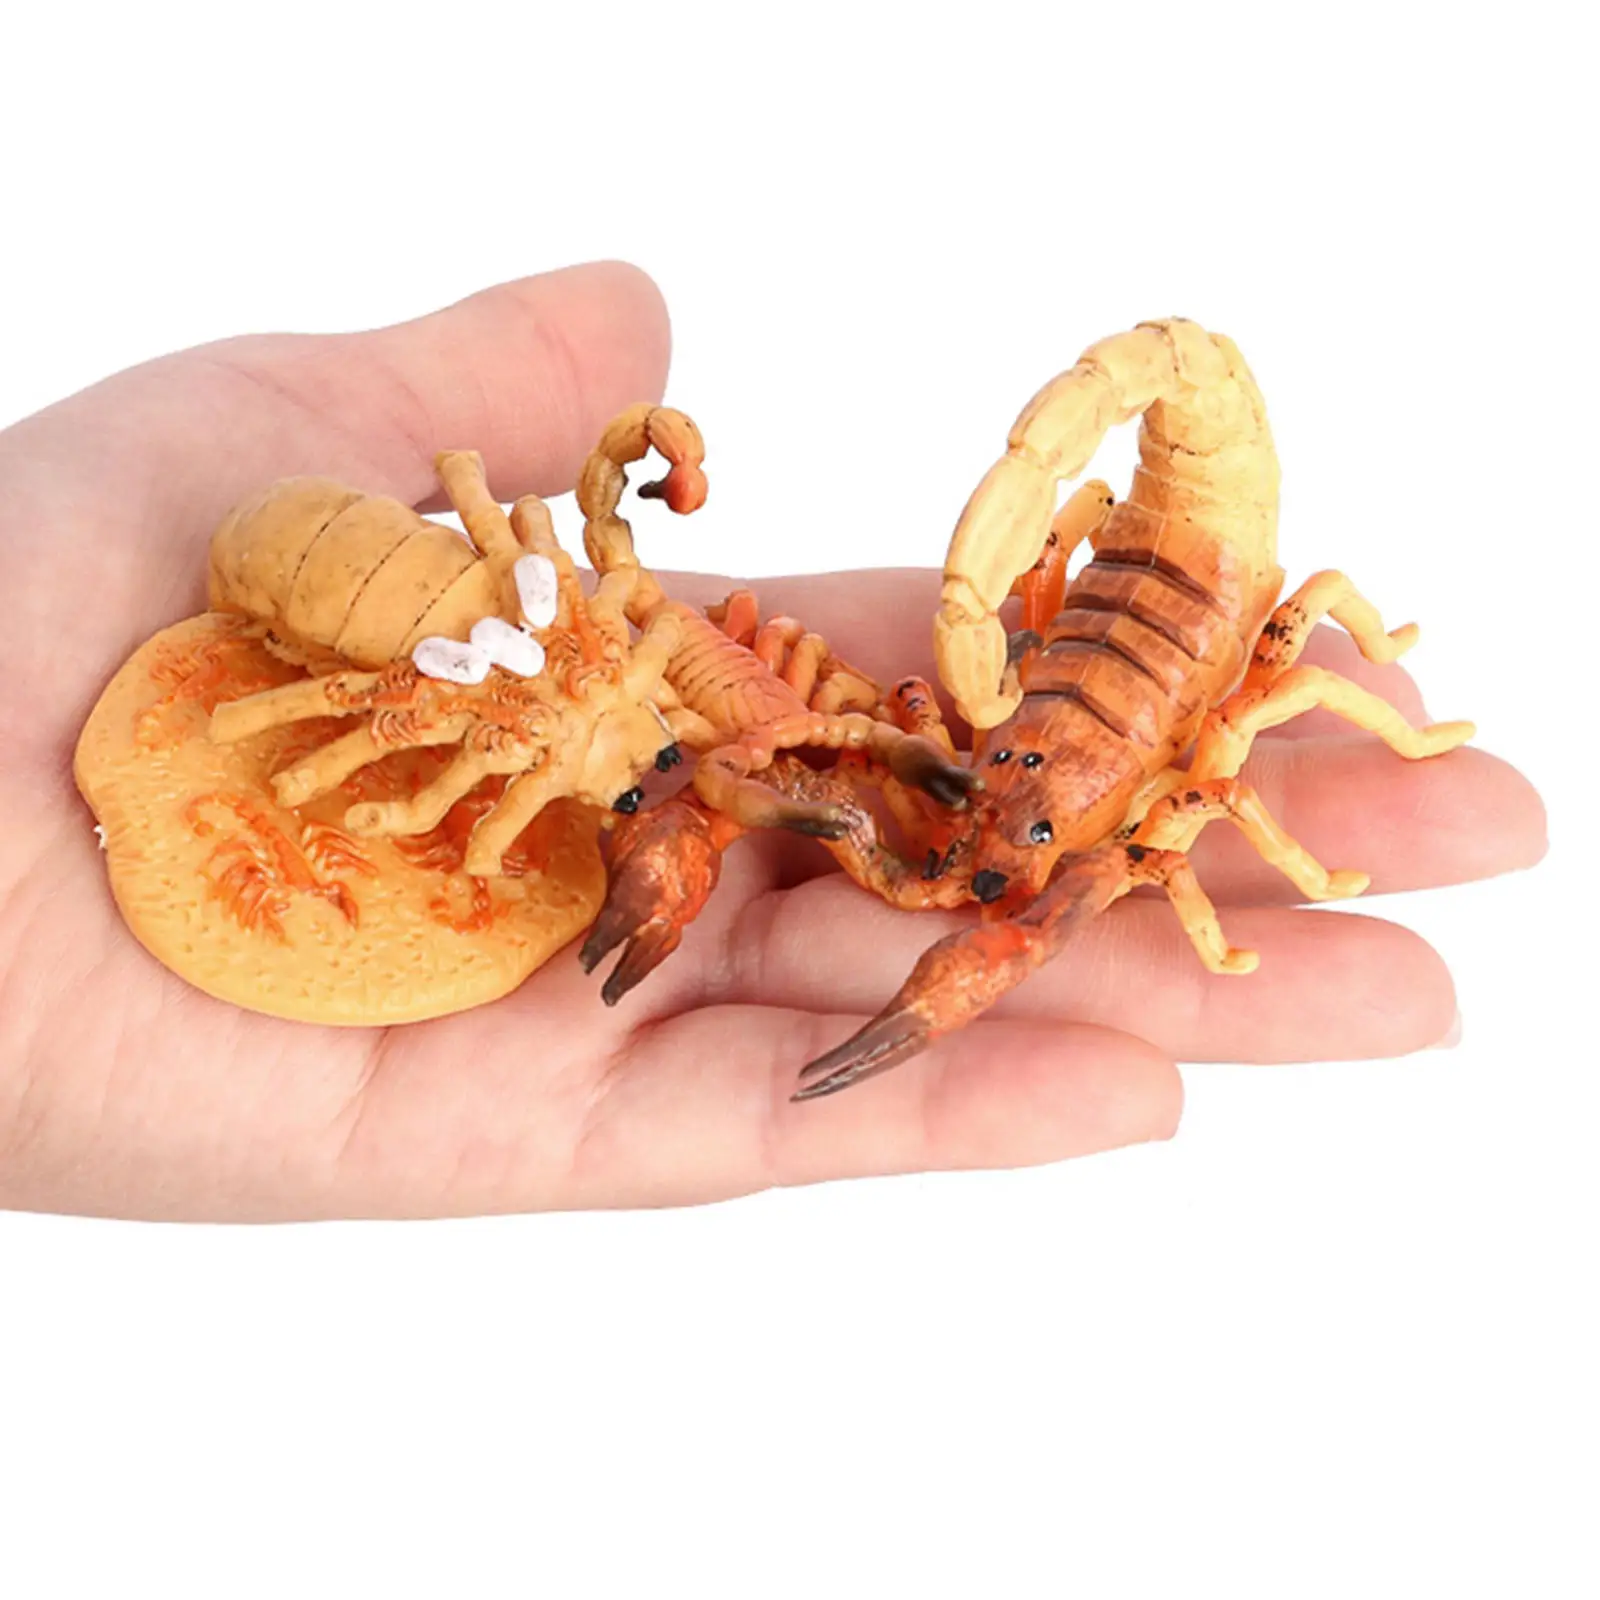 Kids Scorpion Life Cycle Model Action Toy Figures Educational Preschool Toys